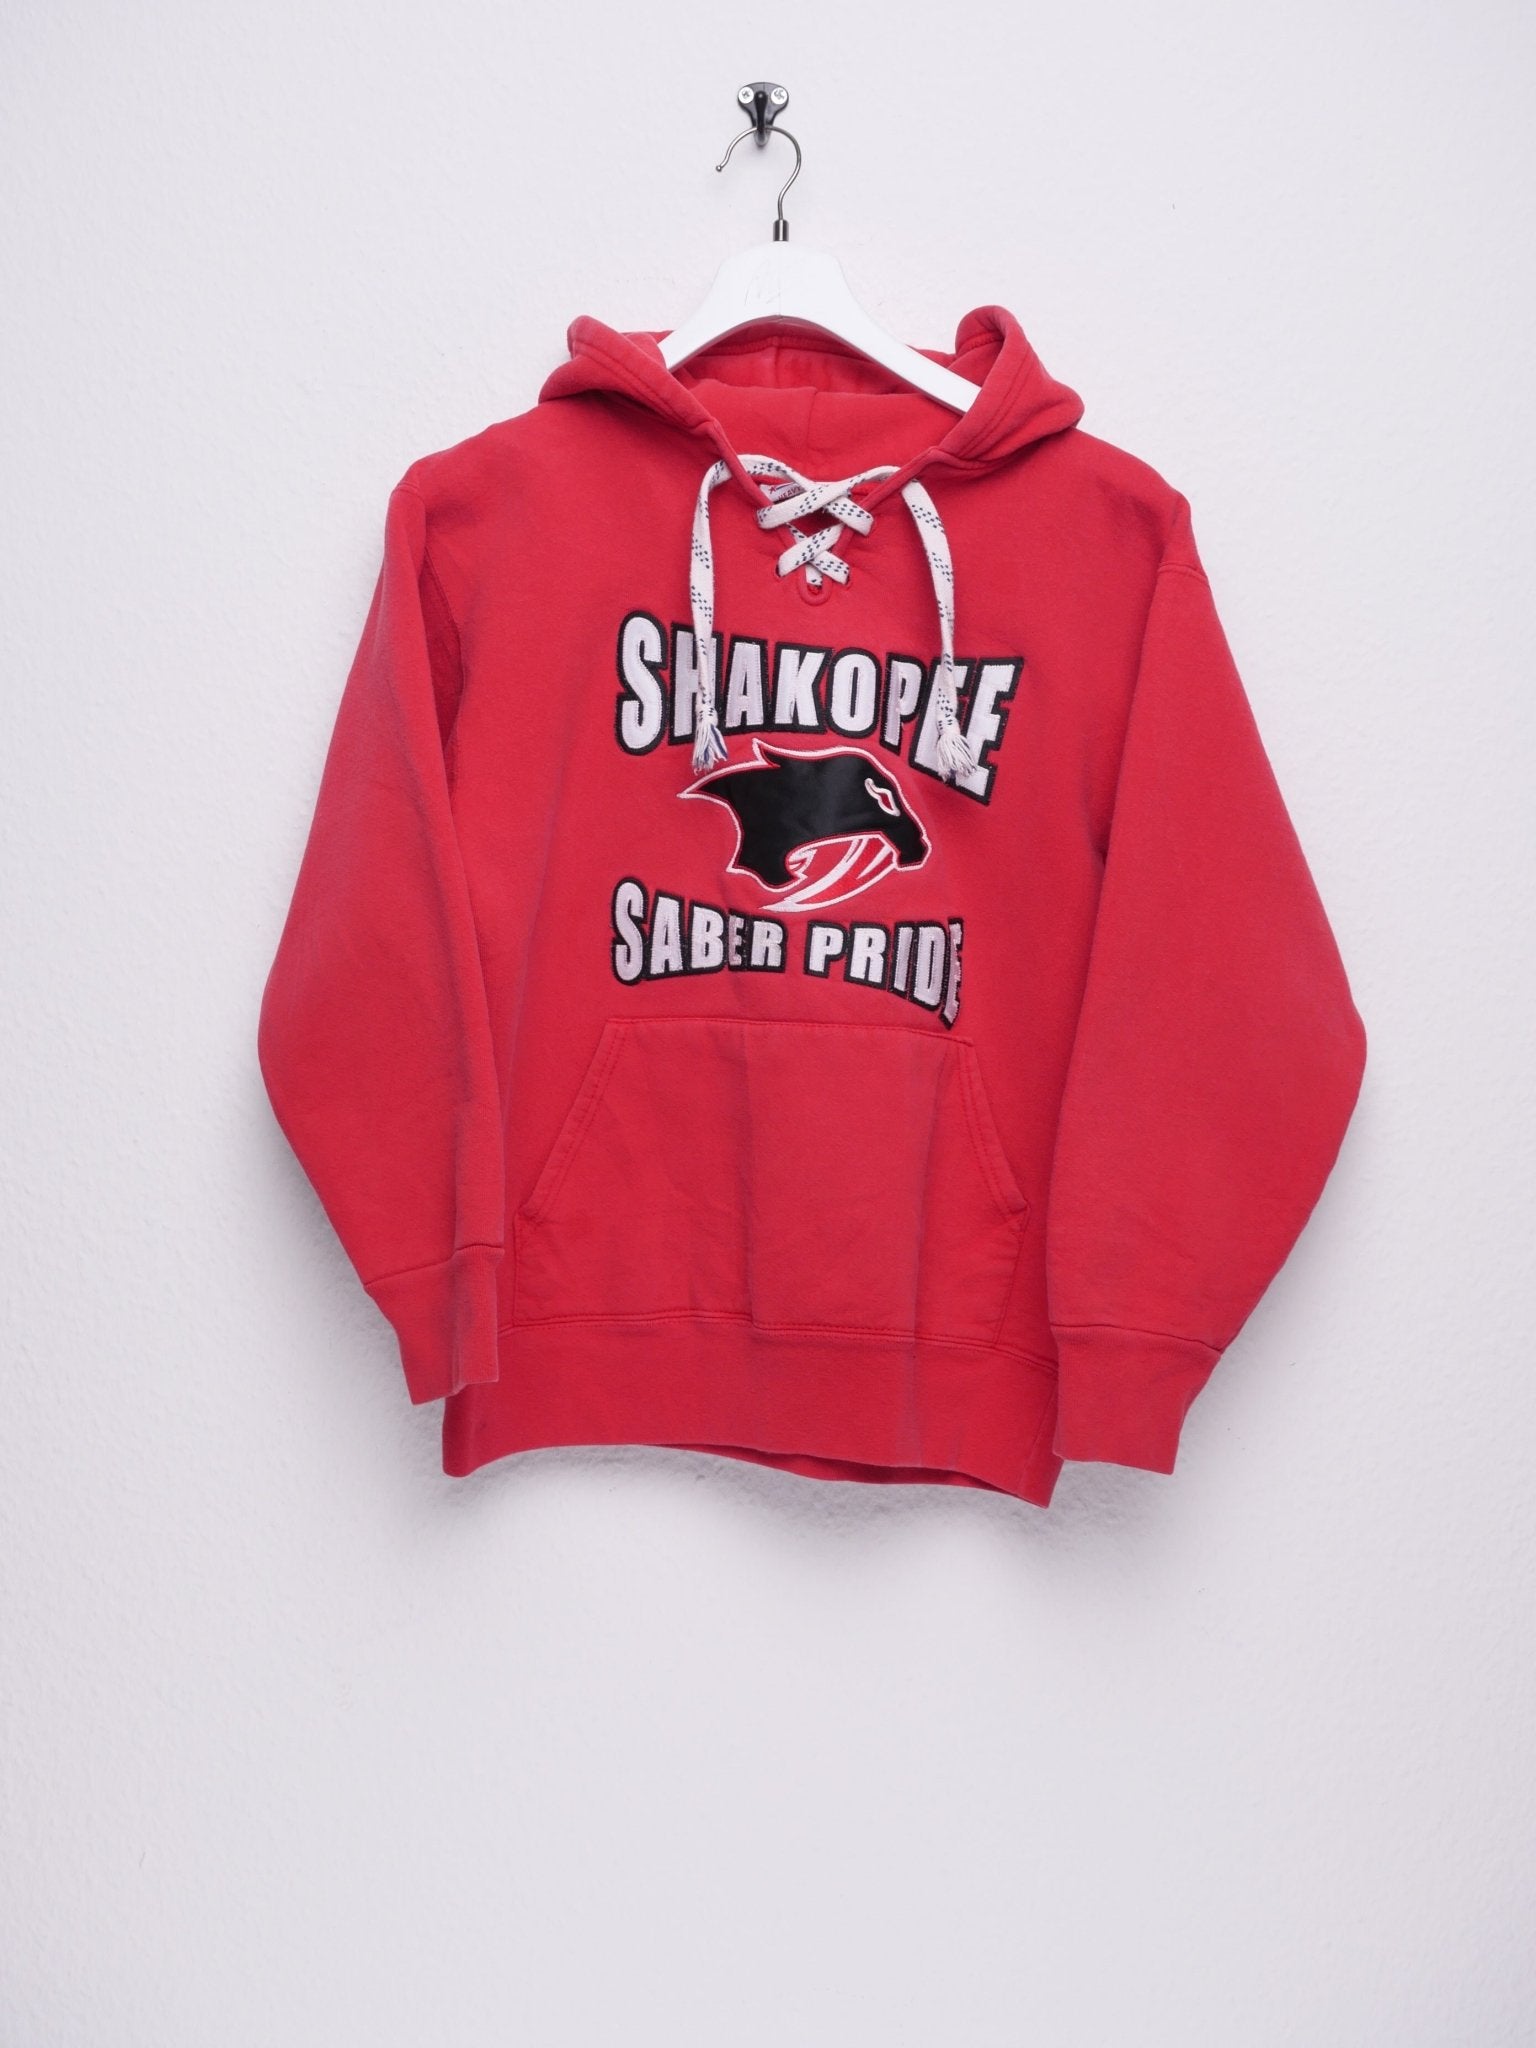 Eagle 'Shakopee Saber Pride' embroidered red Hoodie - Peeces